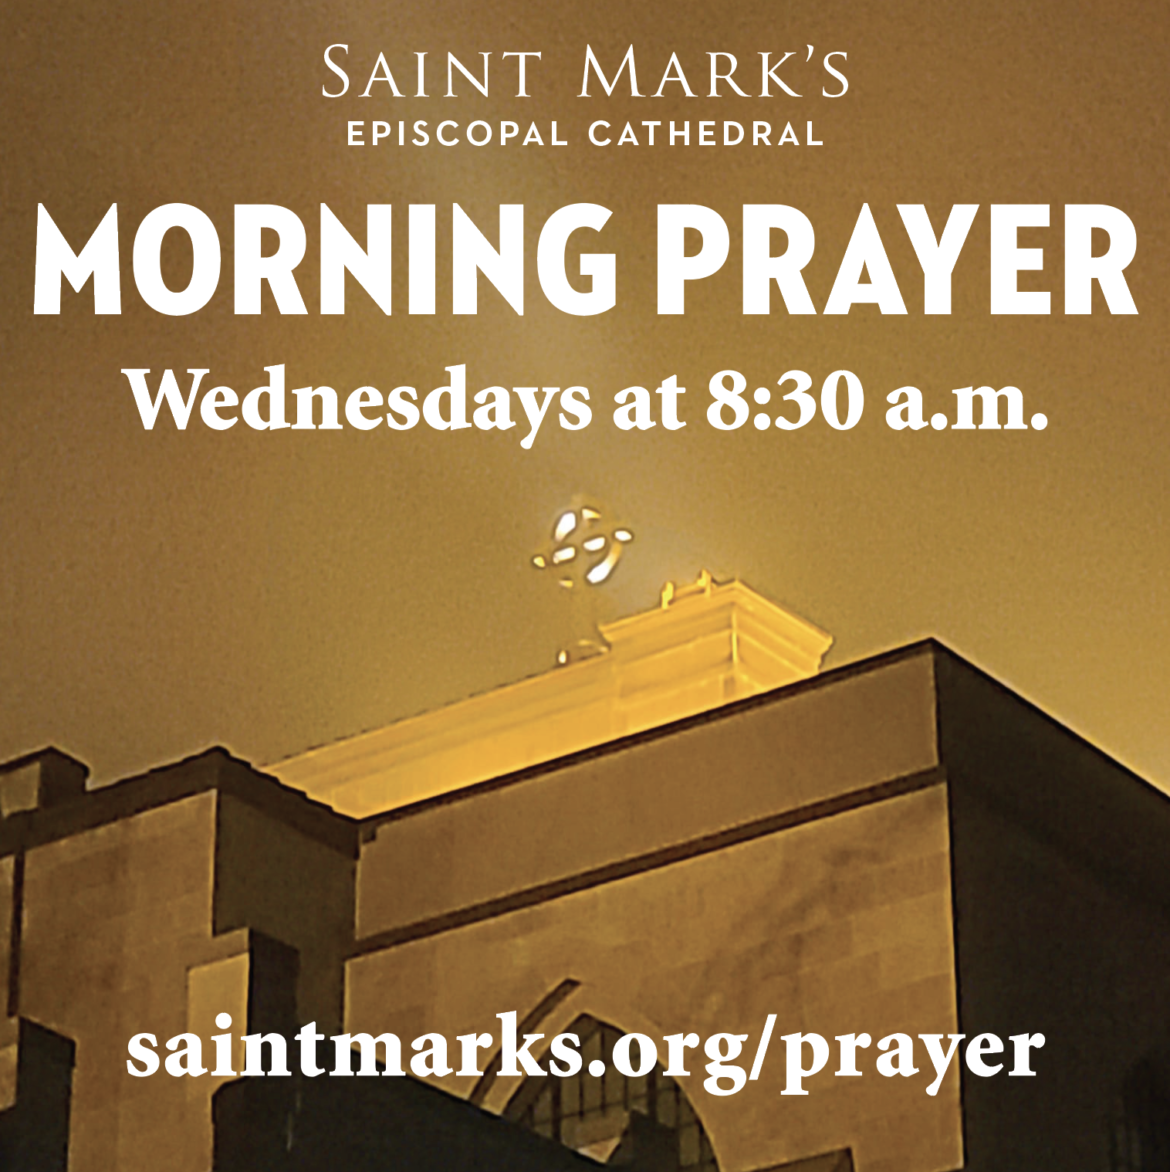 NEW! A Service of Morning Prayer— Wednesdays at 8:30 a.m.